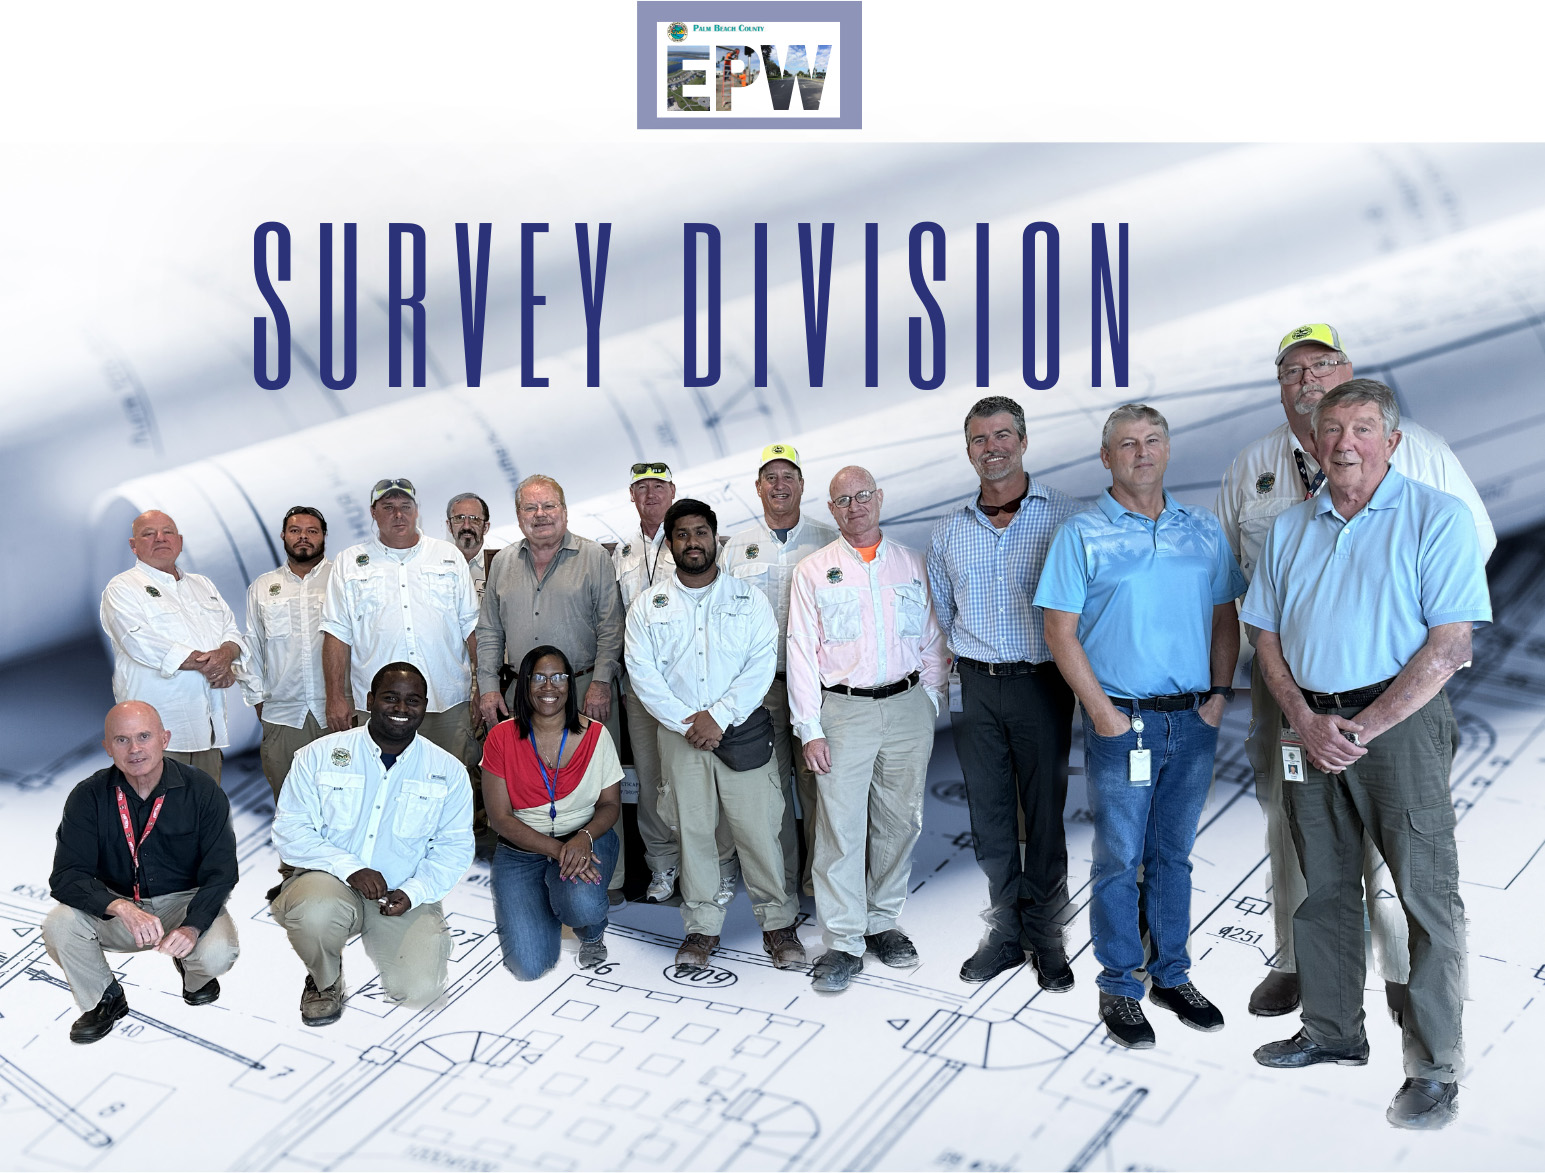 Survey Division logo and employees posing